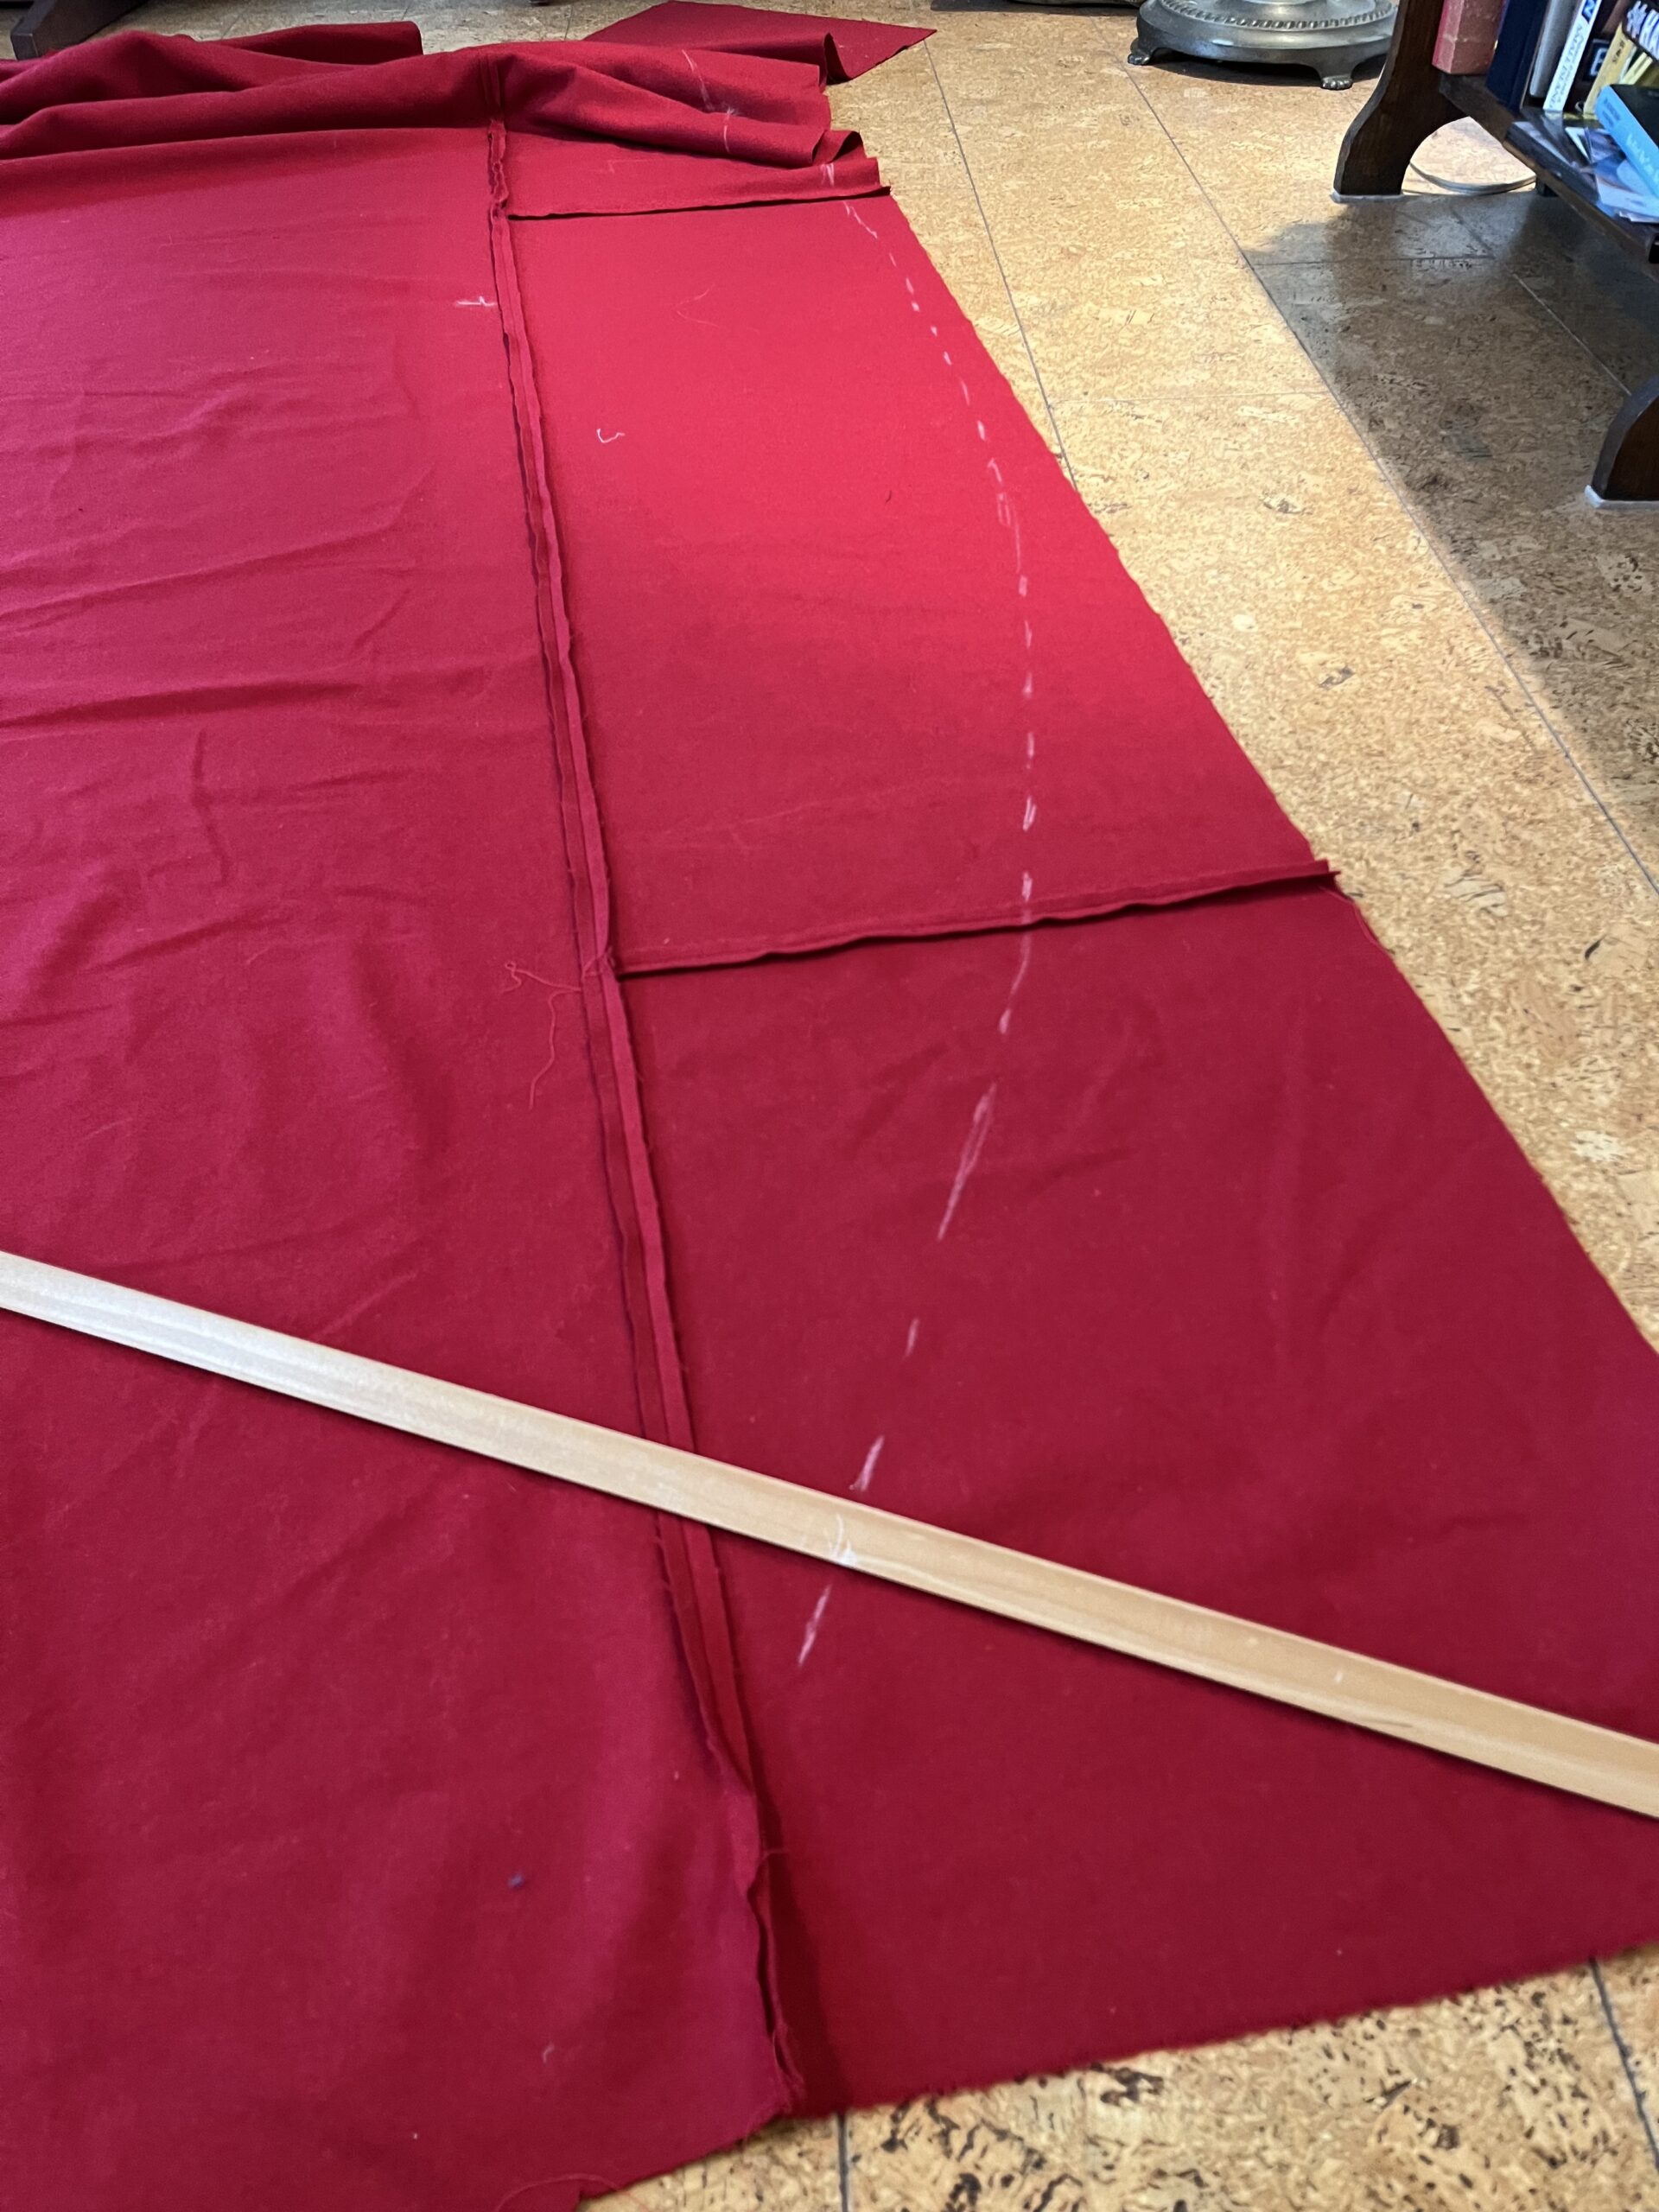 A long wooden rod is being used to trace a large curve across a pieced length of red wool fabric